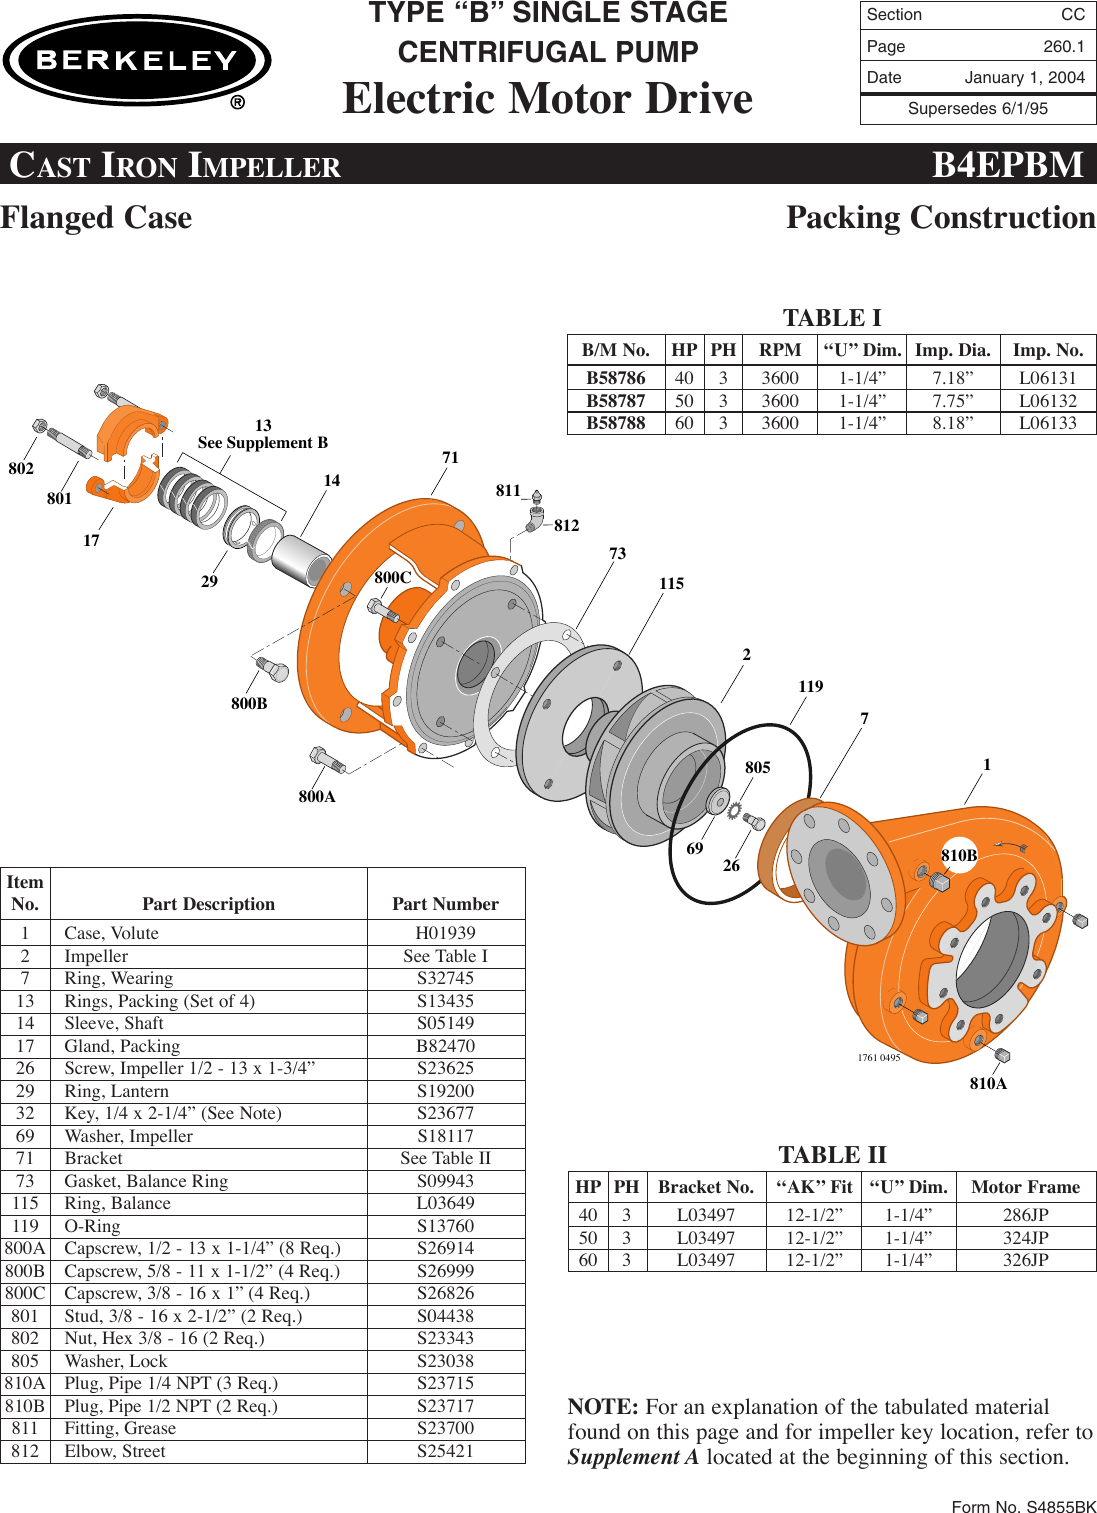 Page 1 of 9 - FM Section  552378 1 Berkeley Type B Centrifugal Pump Repair Parts